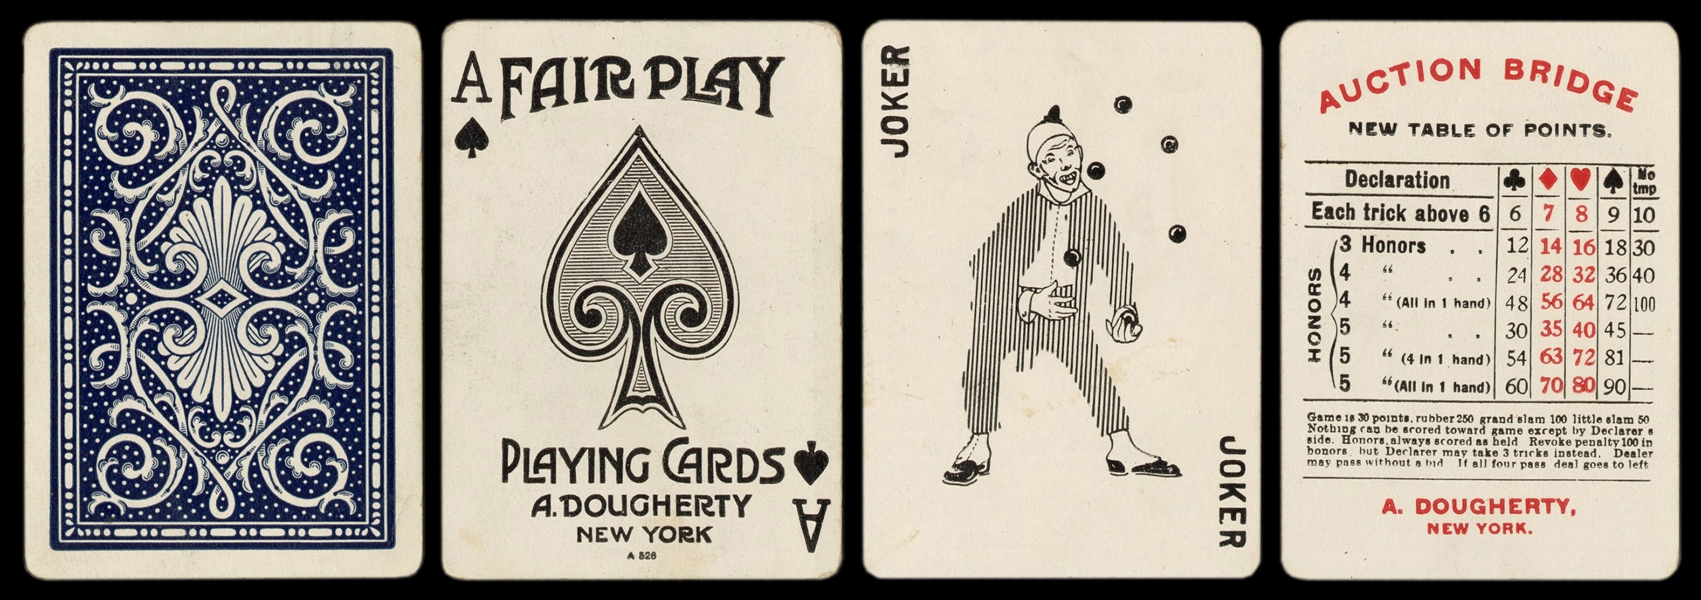  Dougherty Fair Play Playing Cards. New York: Andrew Dougher...